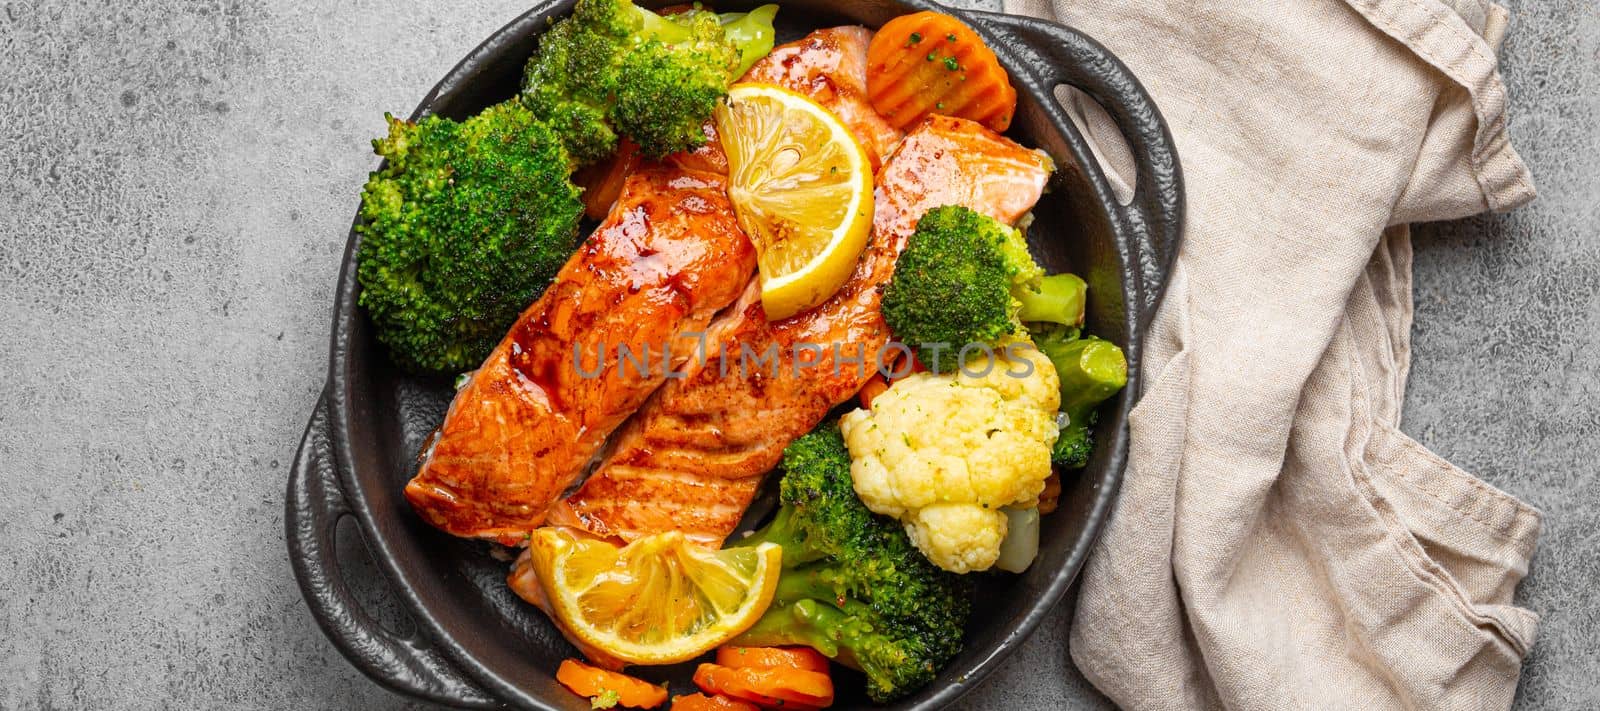 Healthy baked fish salmon steaks, broccoli, cauliflower, carrot in black cast iron casserole bowl on grey rustic stone background. Cooking a delicious low carb dinner, healthy nutrition concept by its_al_dente